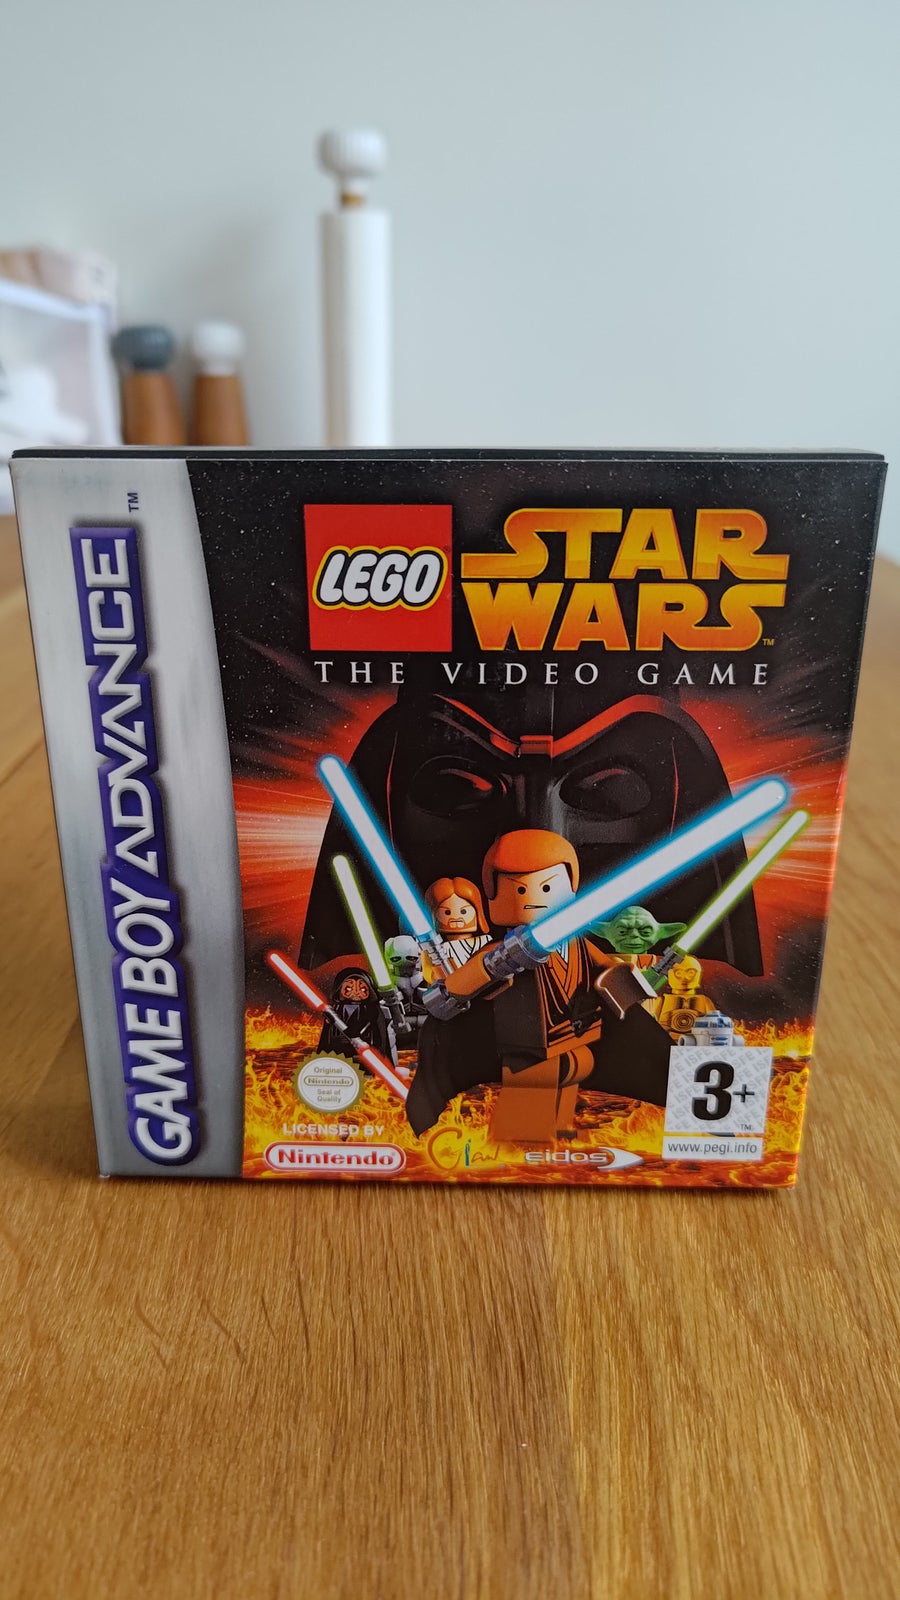 LEGO STAR WARS THE VIDEO GAME CIB, Gameboy Advance, action